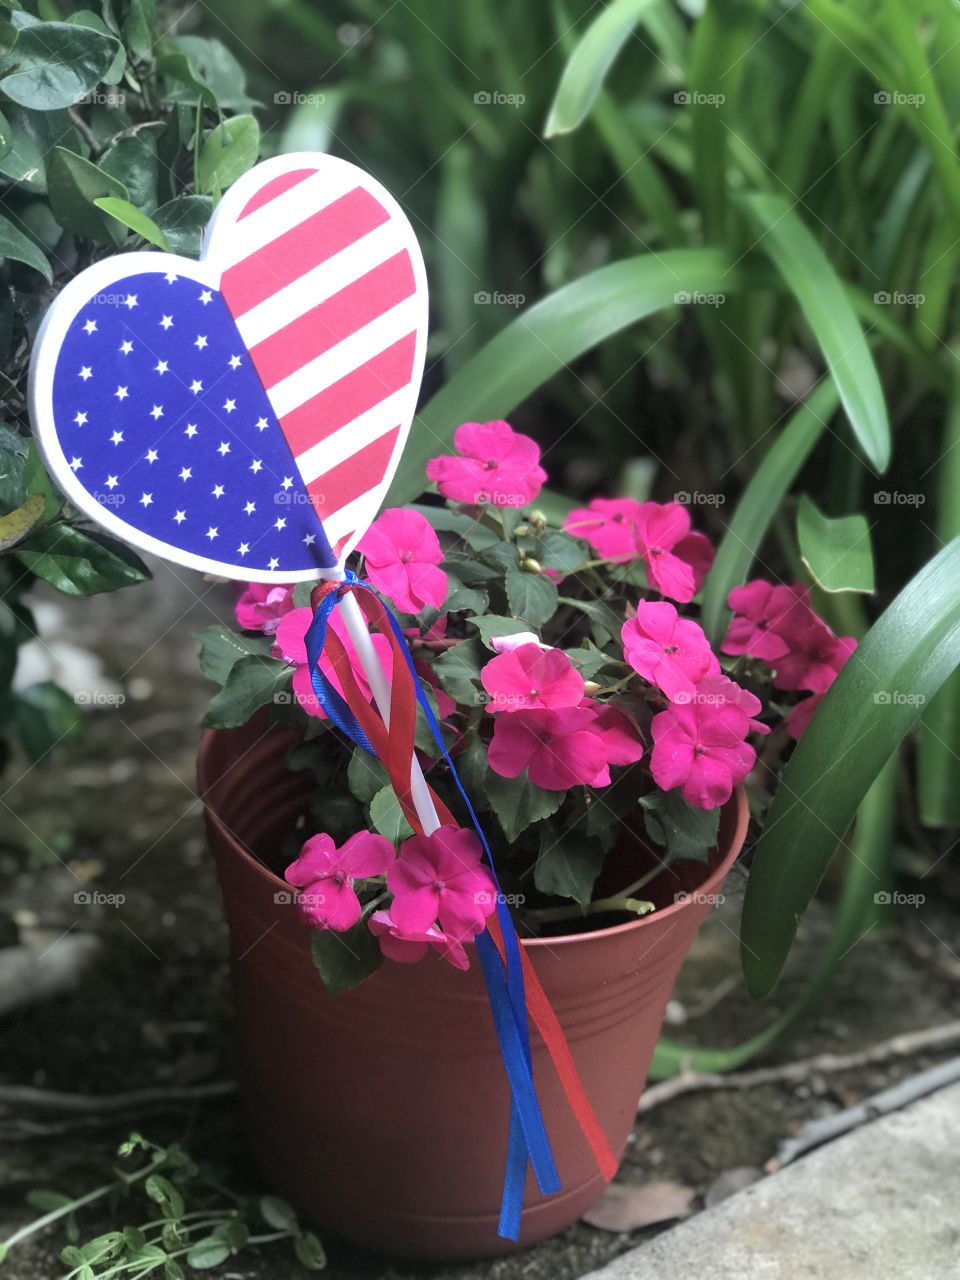 Celebrating Memorial Day - heart shaped American Flag decor in the garden with pink flowers. USA, America 